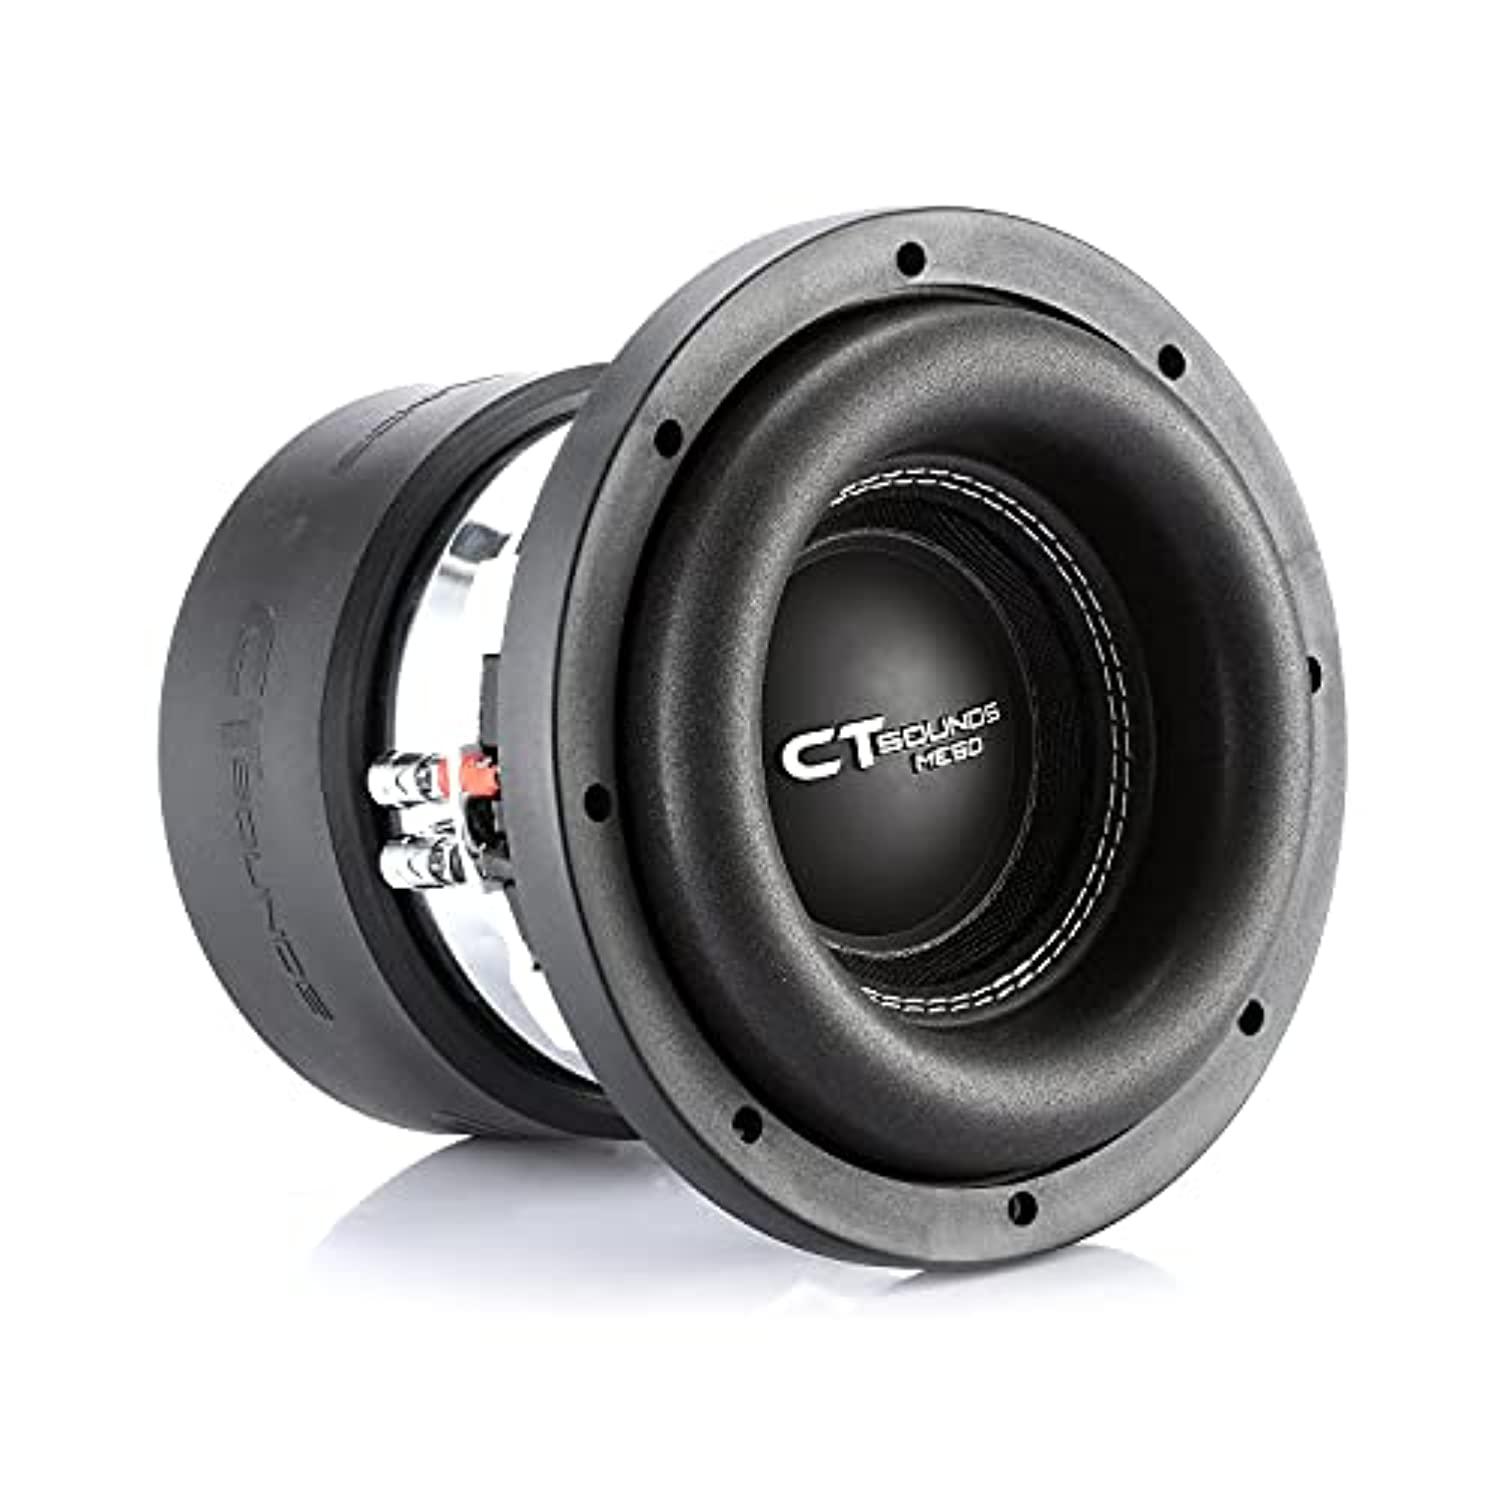 ct sounds meso-8-d4 1600 watts max 8 inch car subwoofer dual 4 ohm